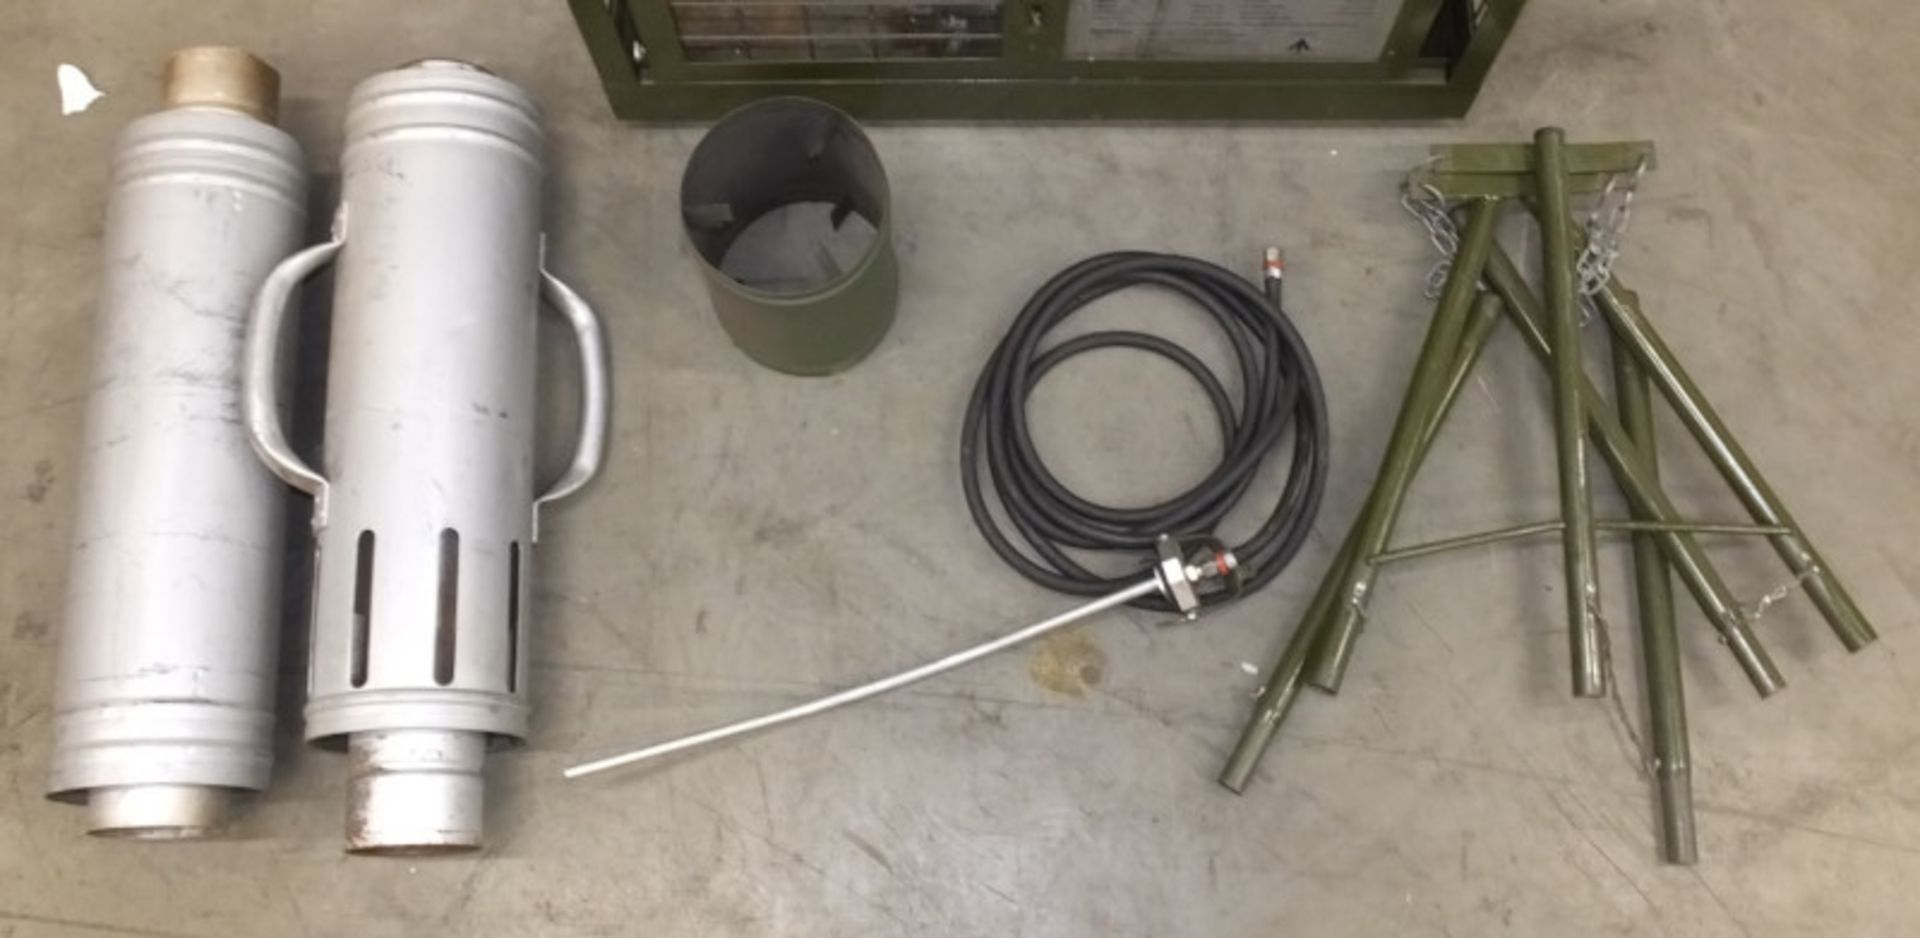 HotBox Heaters Tent Heater GHS III - NSN 4520-99-130-6045 Output - 5-15kW, Ex-MOD specific - Image 3 of 10